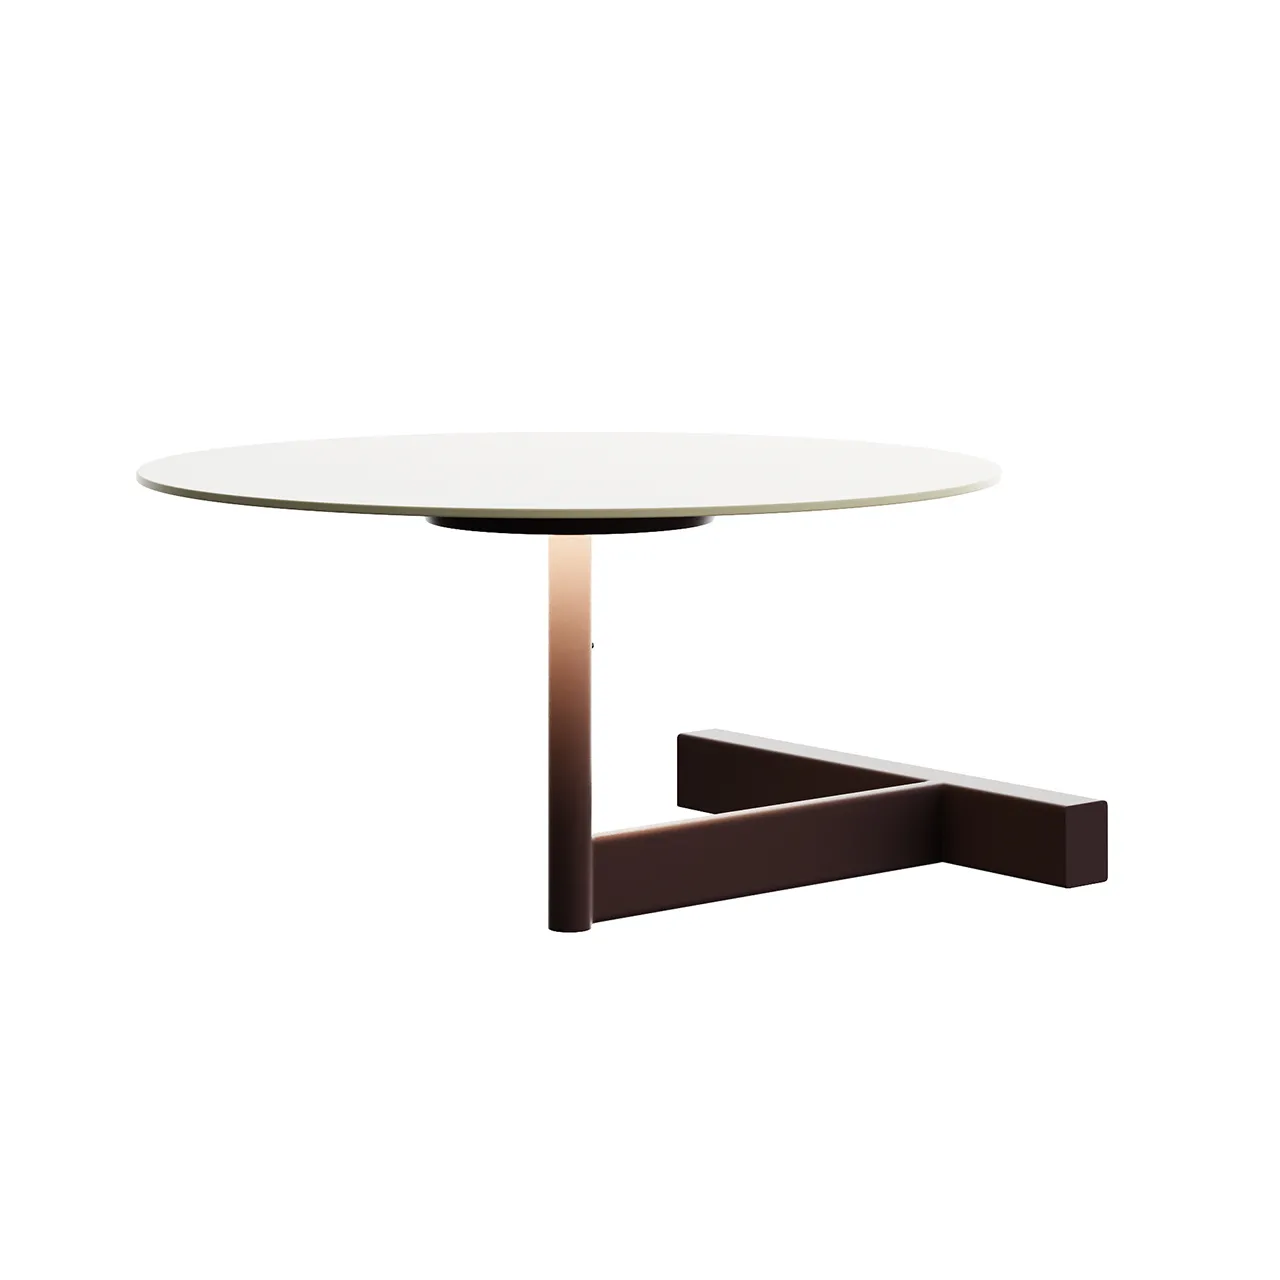 Lighting – 5965-flat-table-lamp-by-vibia